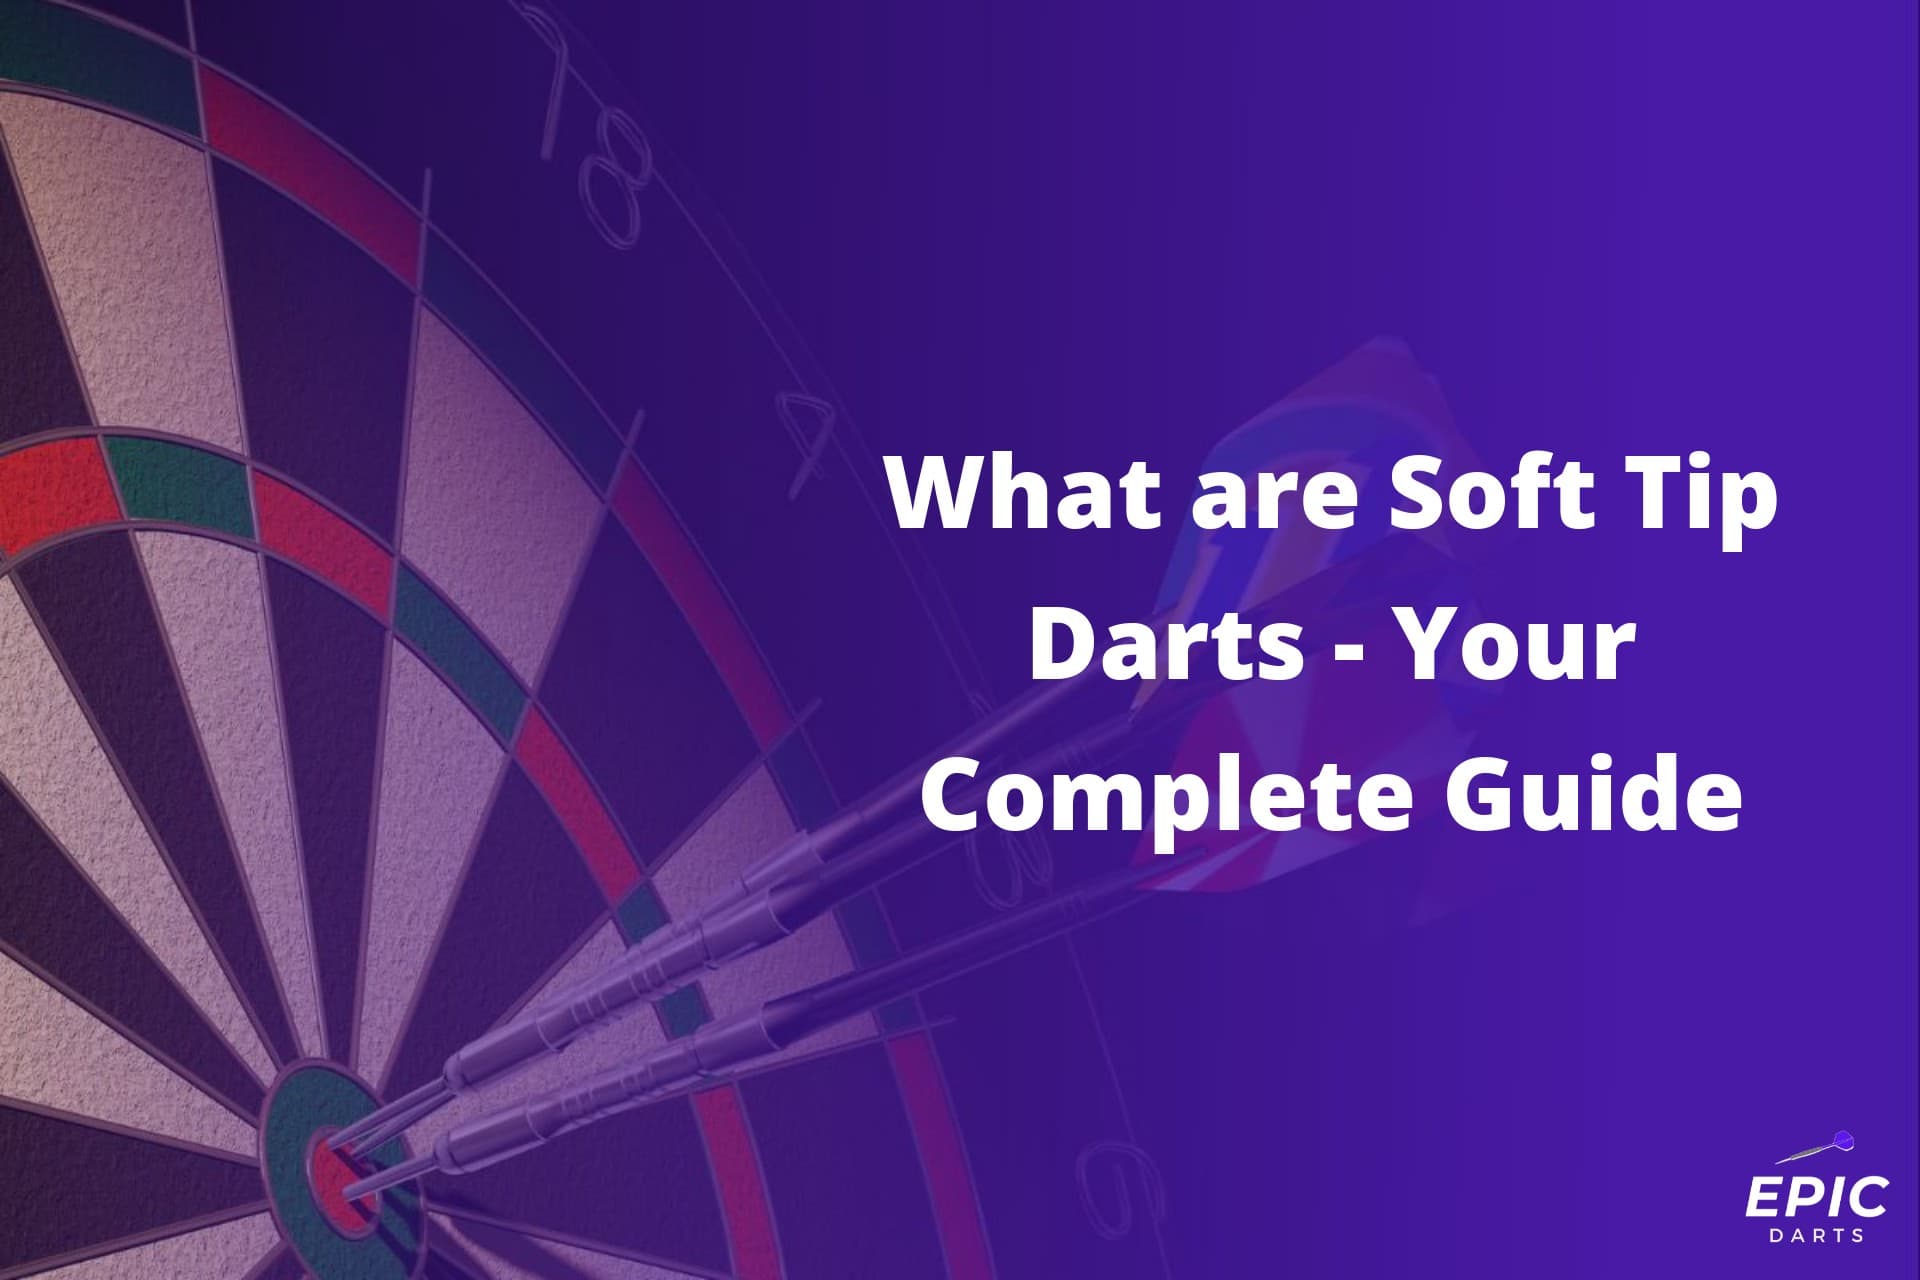 What are Soft Tip Darts - Your Complete Guide - Epic Darts